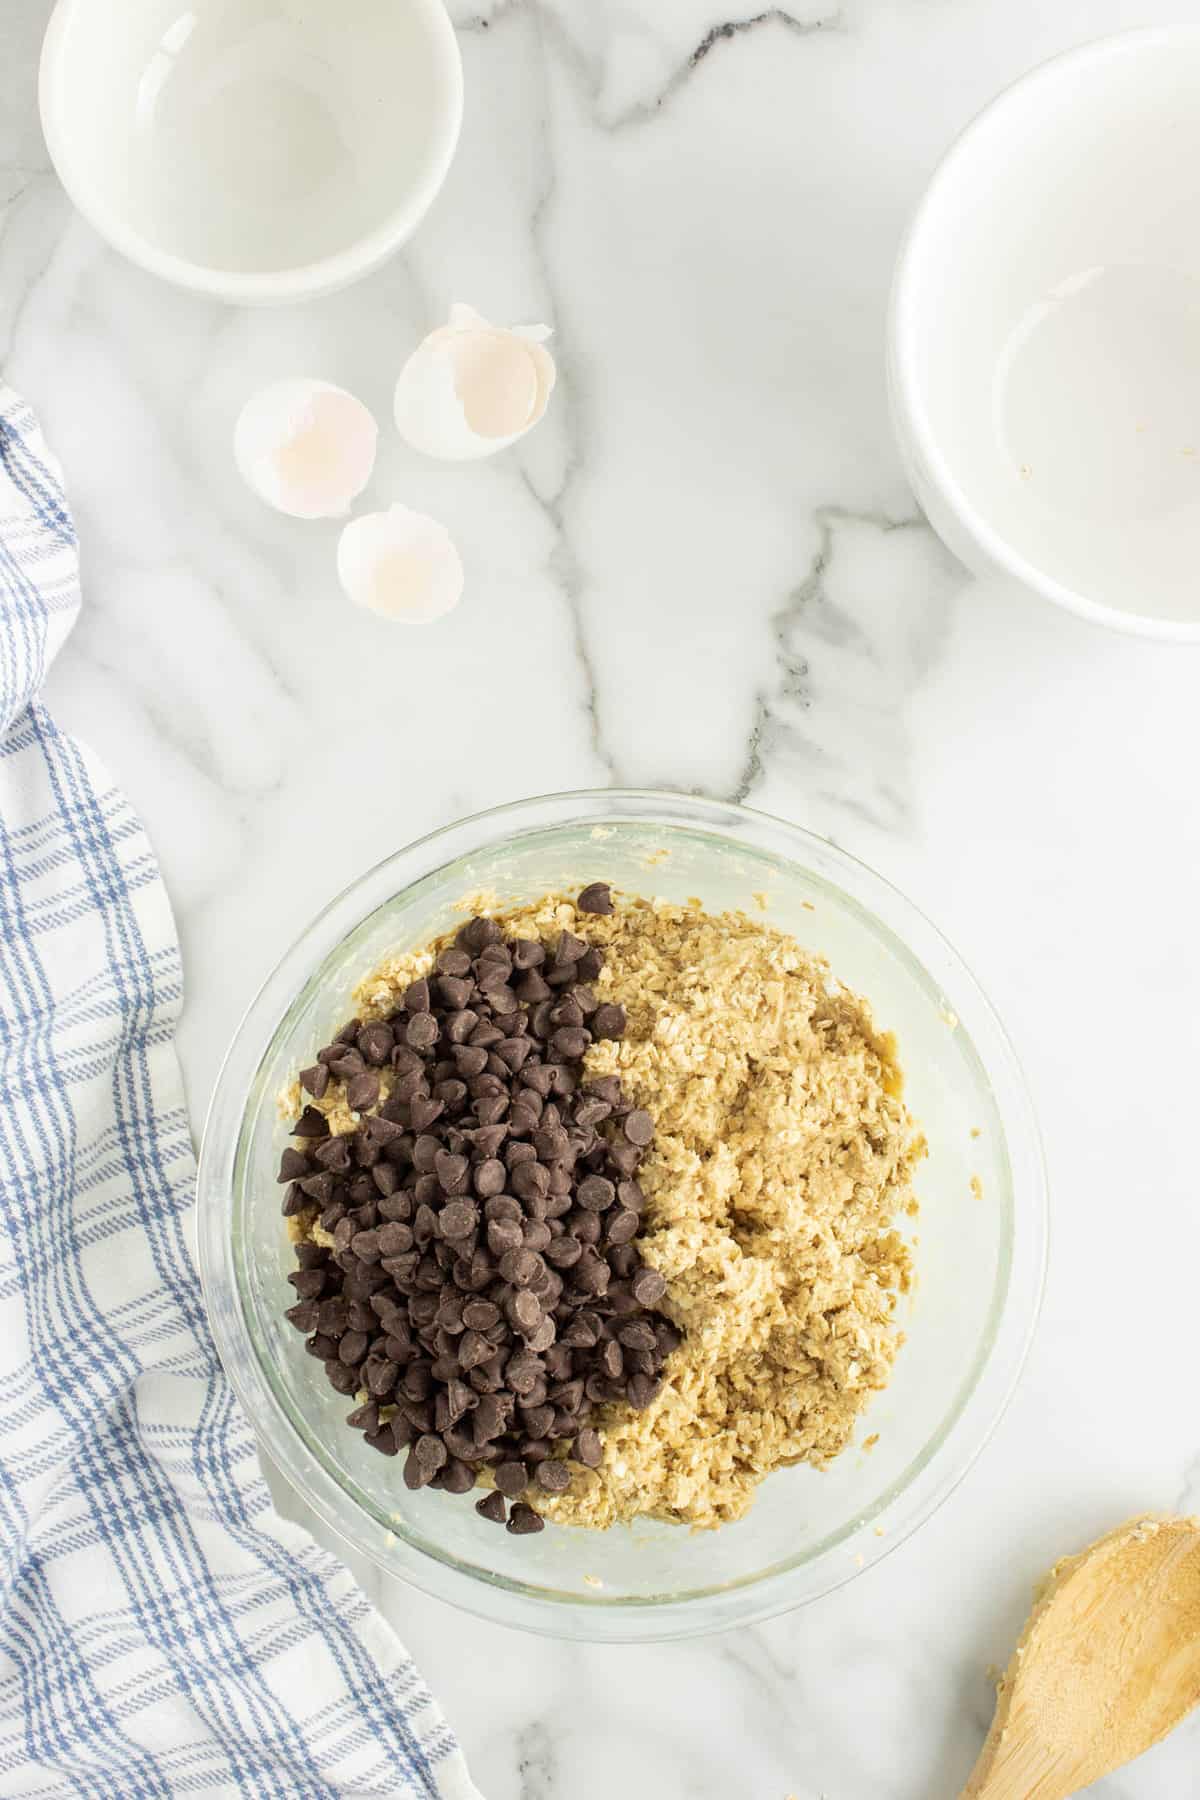 Adding Oats and Chocolate Chips for Chewy Oatmeal Chocolate Chip Cookie Recipe